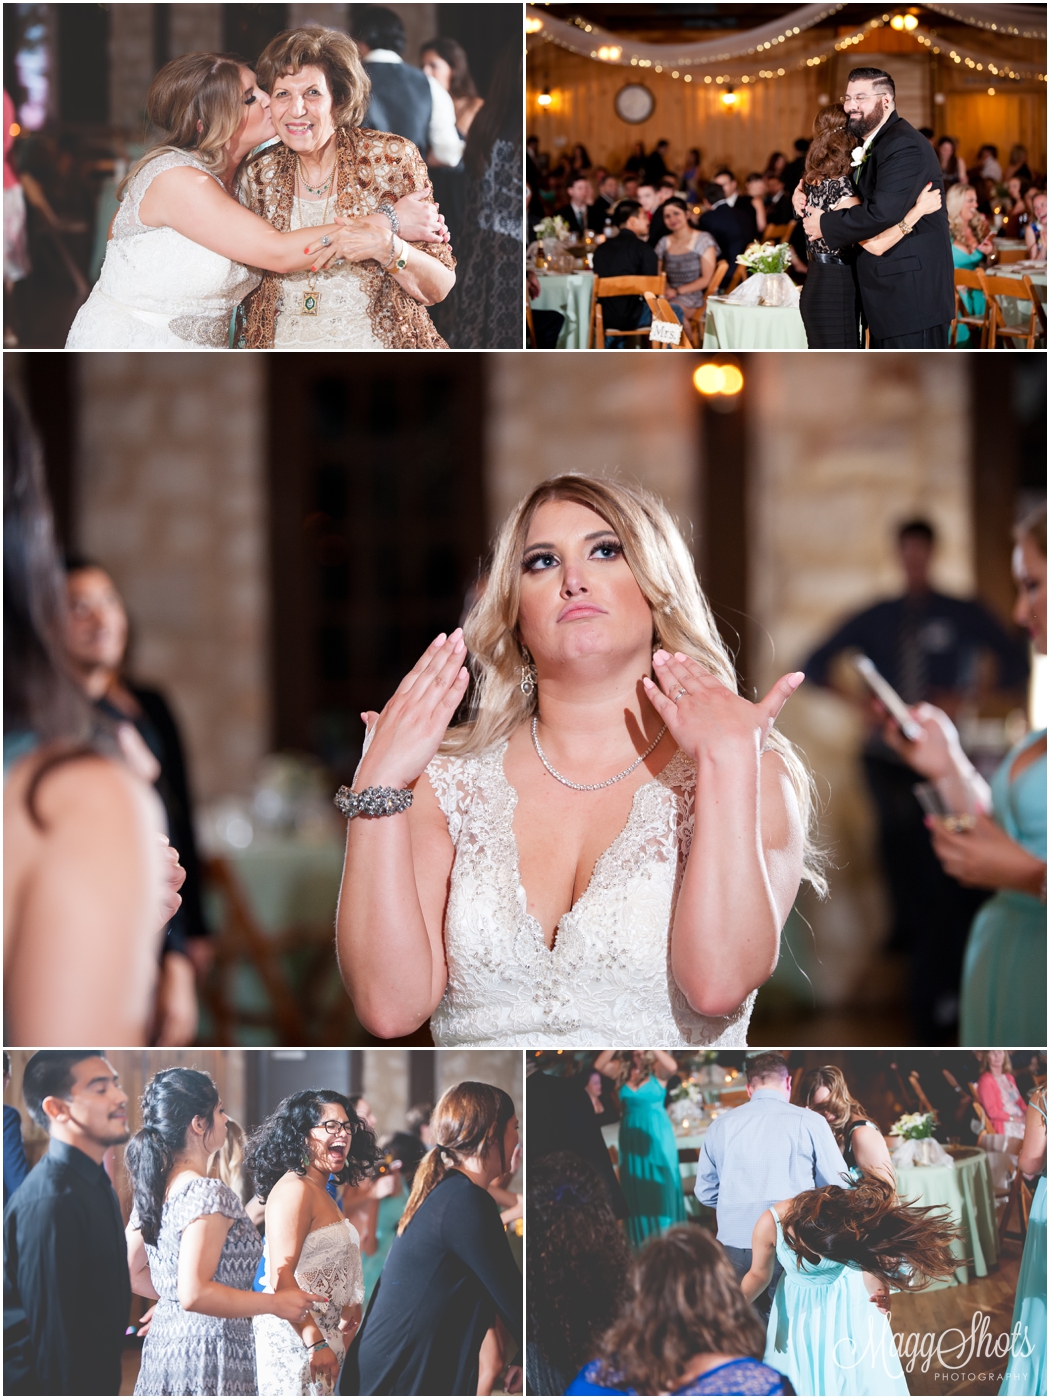 Wedding at the Springs Rockwall, DFW Wedding Photographer, MaggShots Photography